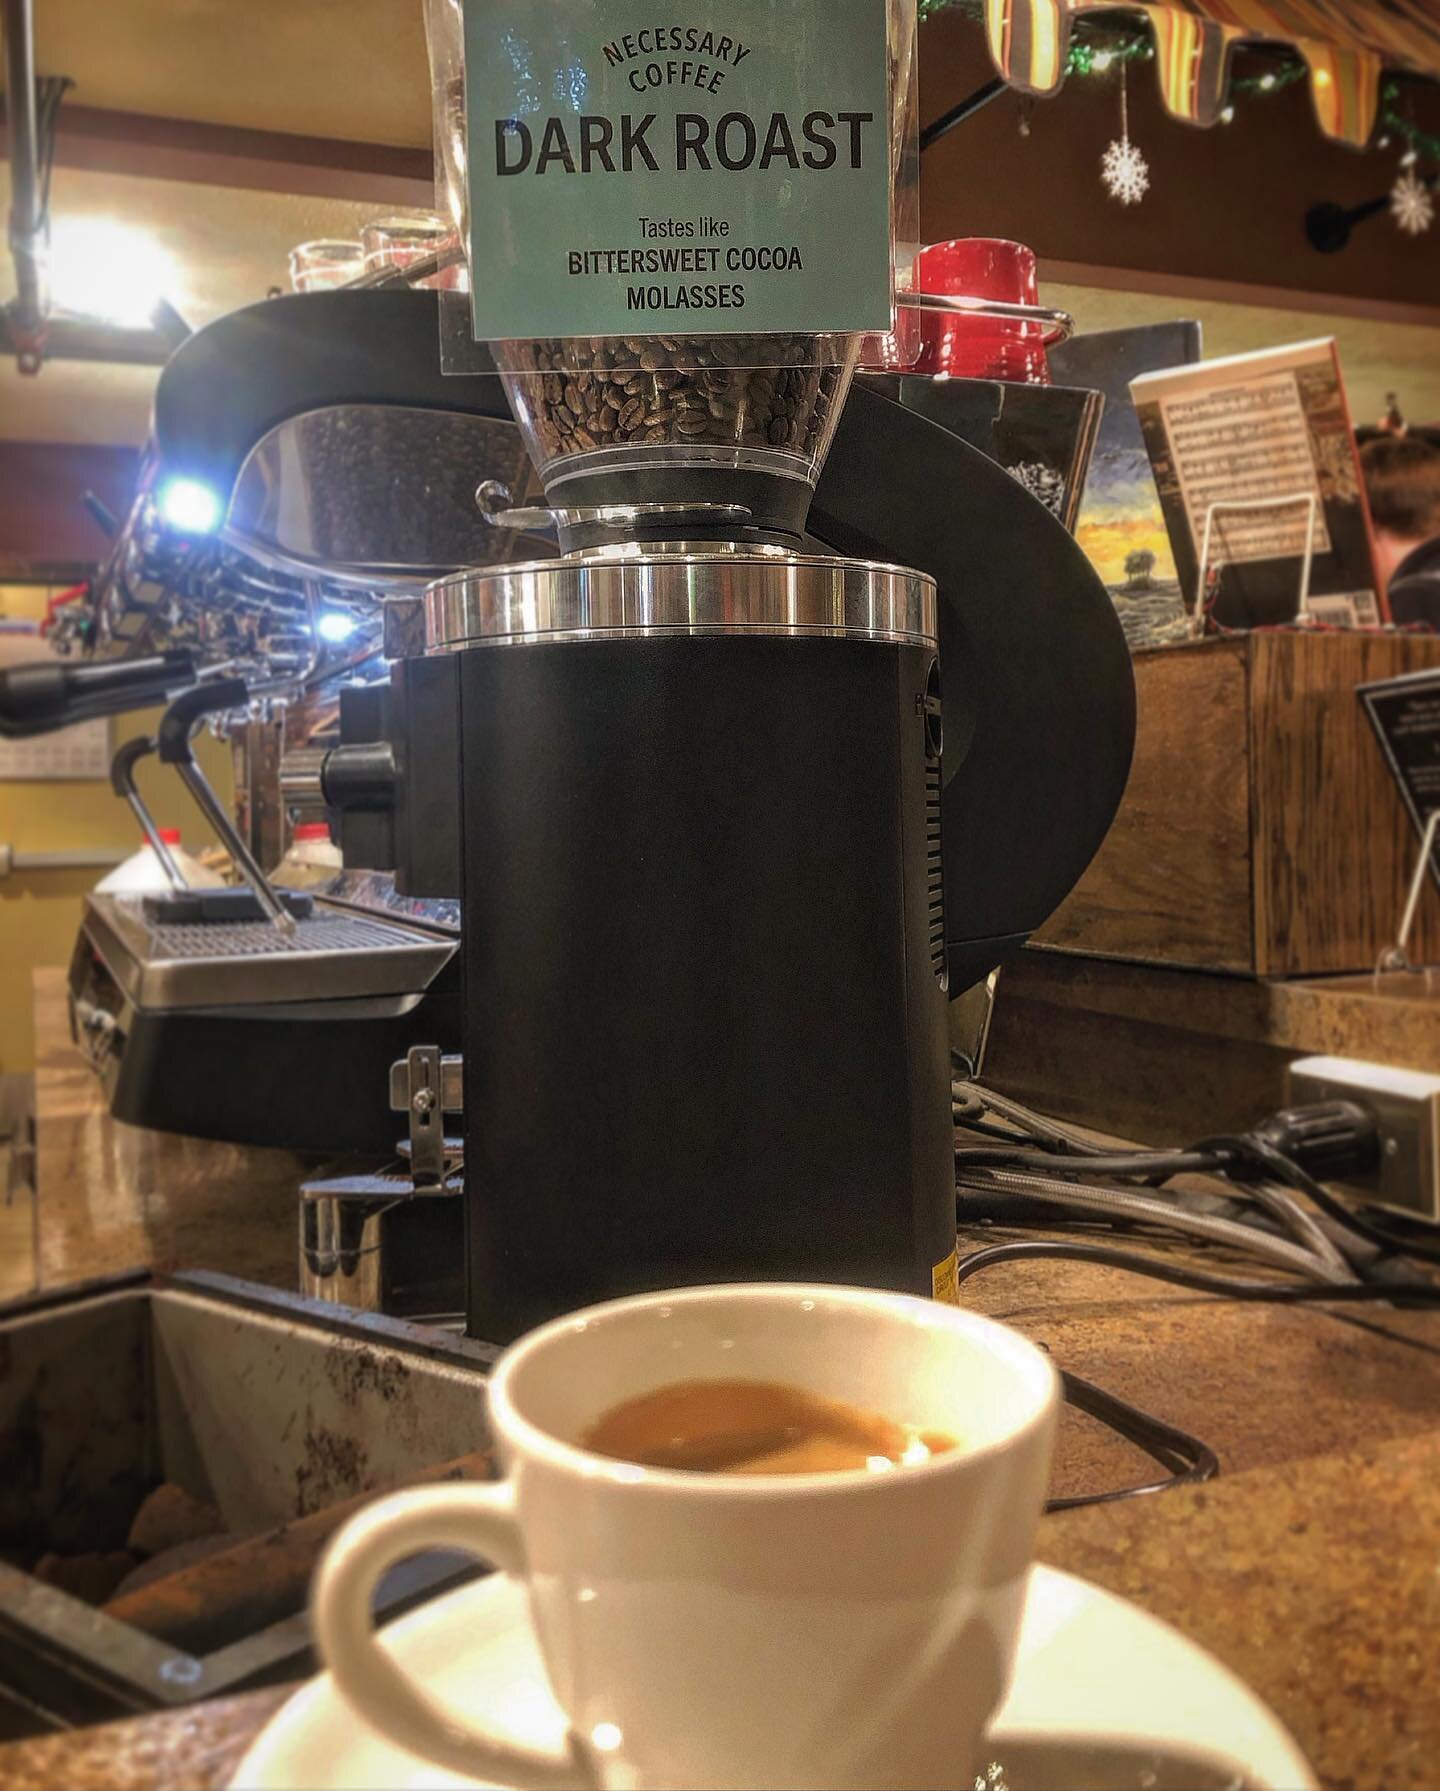 I stopped in to @freshgrounds_coffeehouse for the first time in a long time today, and was incredibly excited to see how busy they were, and was even more excited to taste their brand new espresso blend. 

Their new dark roast makes a classic &ldquo;